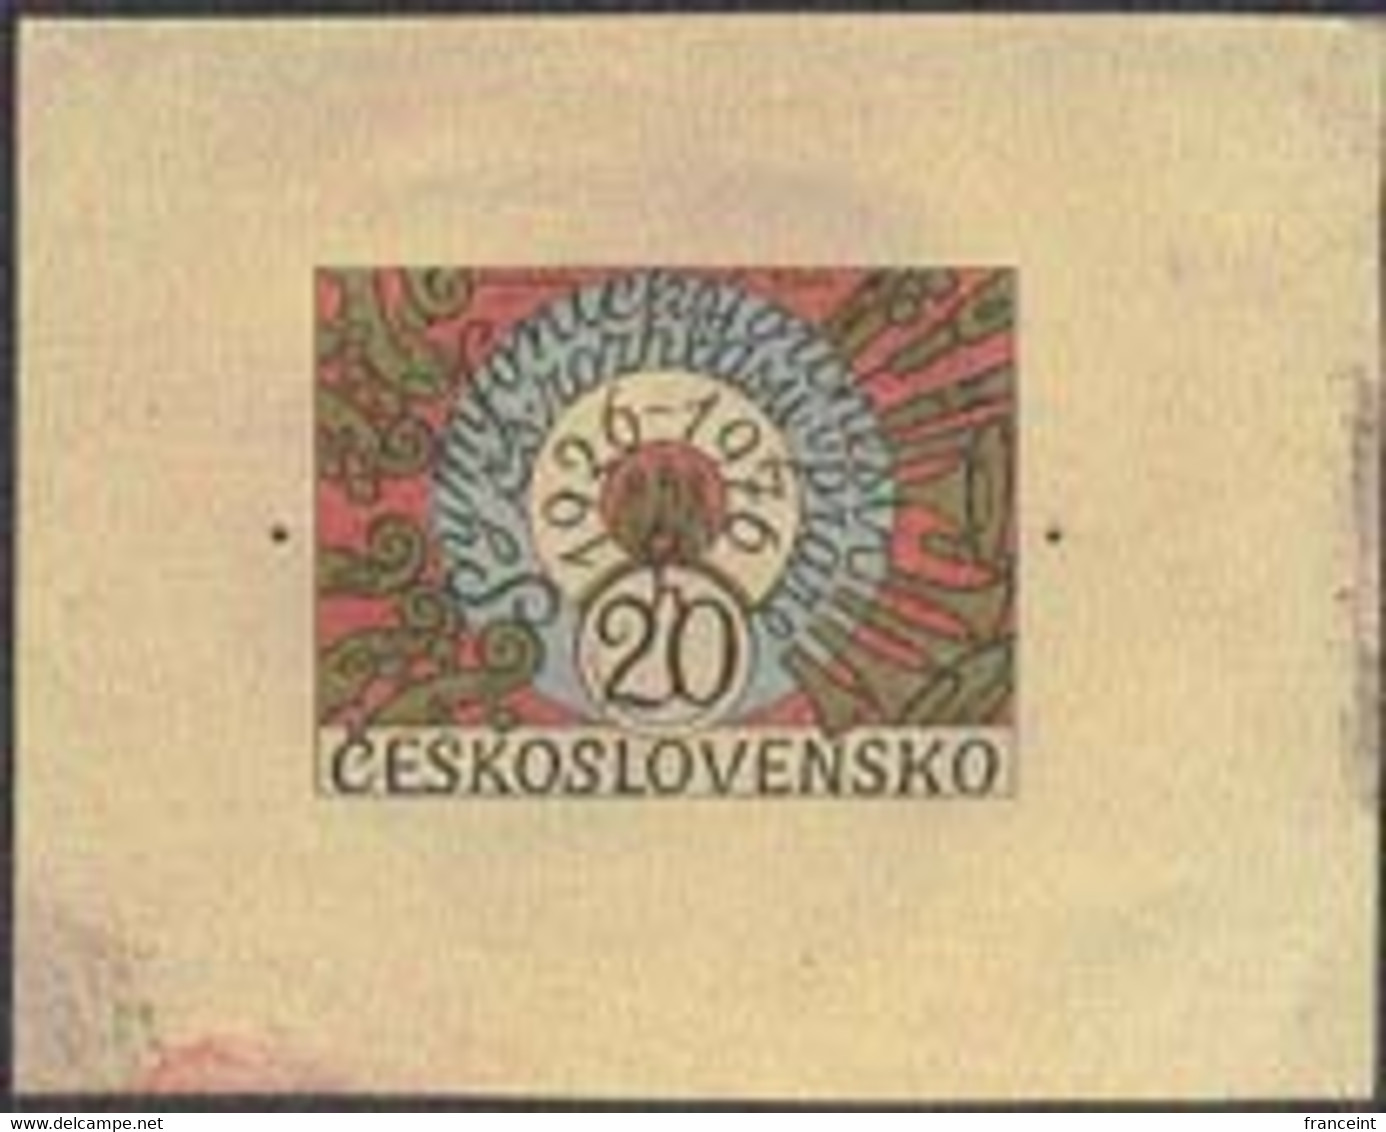 CZECHOSLOVAKIA (1976) Orchestral Instruments. Die Proof In Color. 50th Anniversary Of Radio Prague Orch. Scott No 2063 - Prove E Ristampe